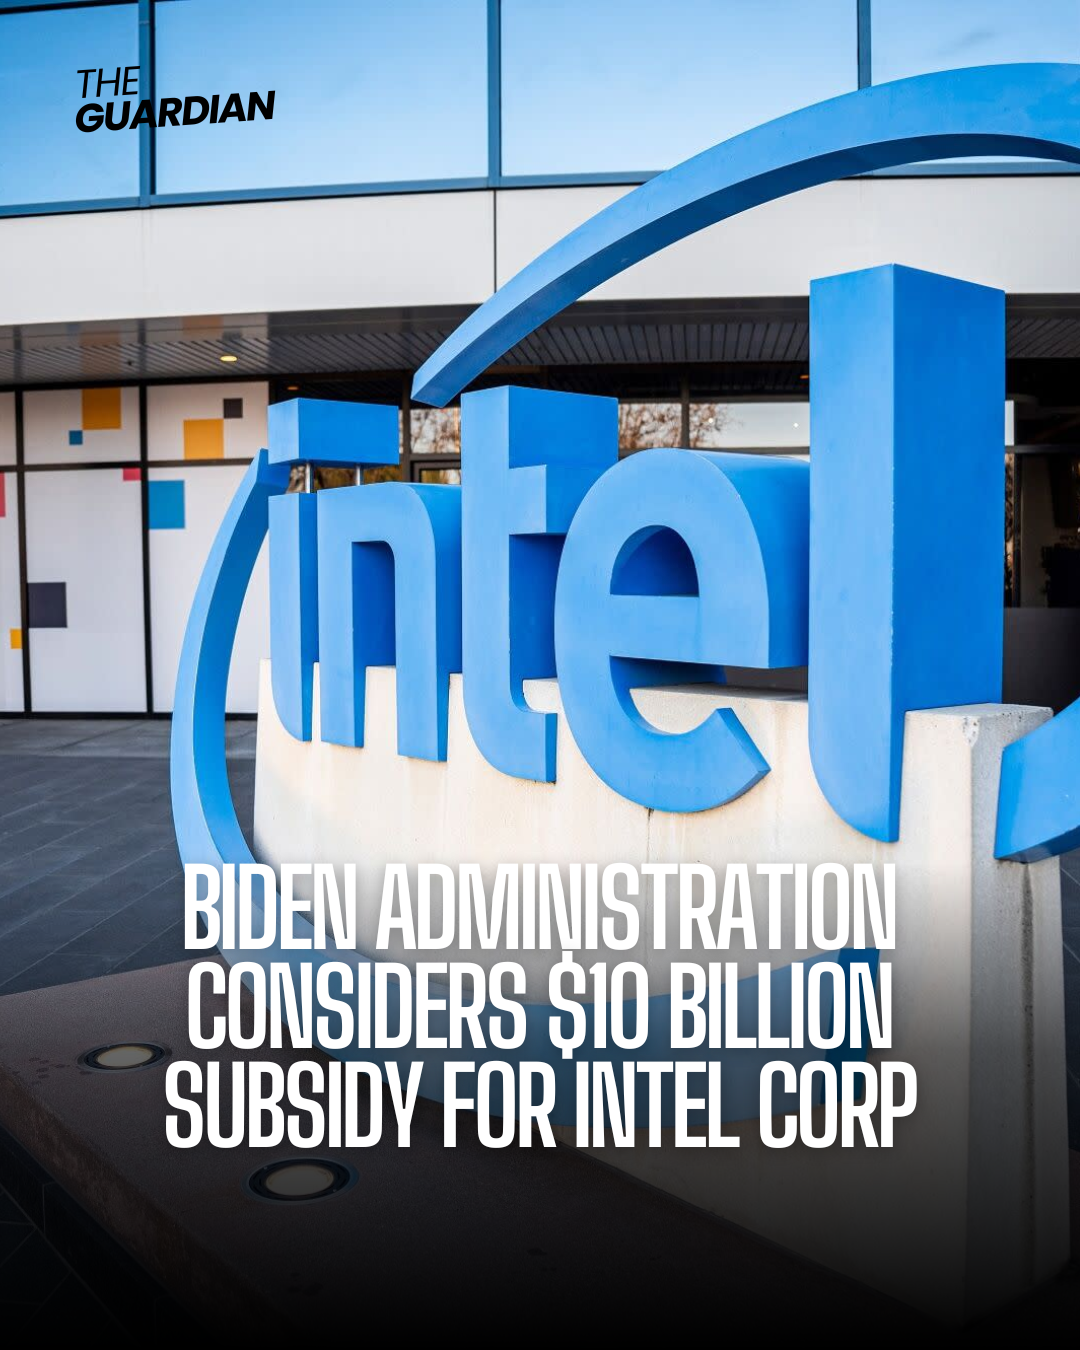 The Biden administration is reportedly in talks to provide Intel Corp. with more than $10 billion in subsidies.